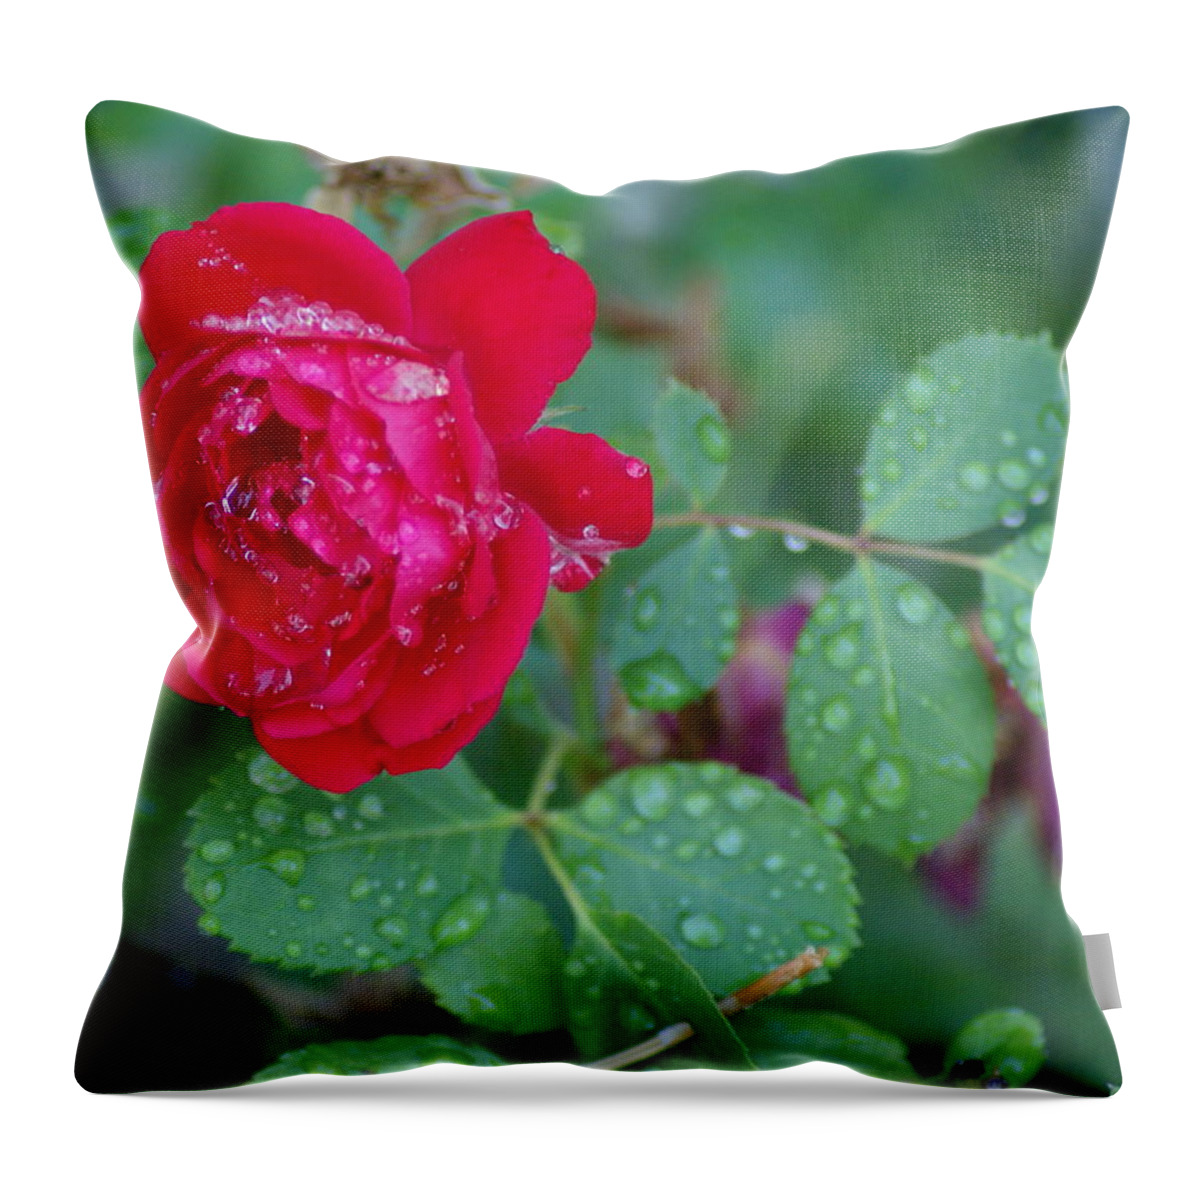 Flowers Throw Pillow featuring the photograph Morning Dew on a Rose by Ben Upham III